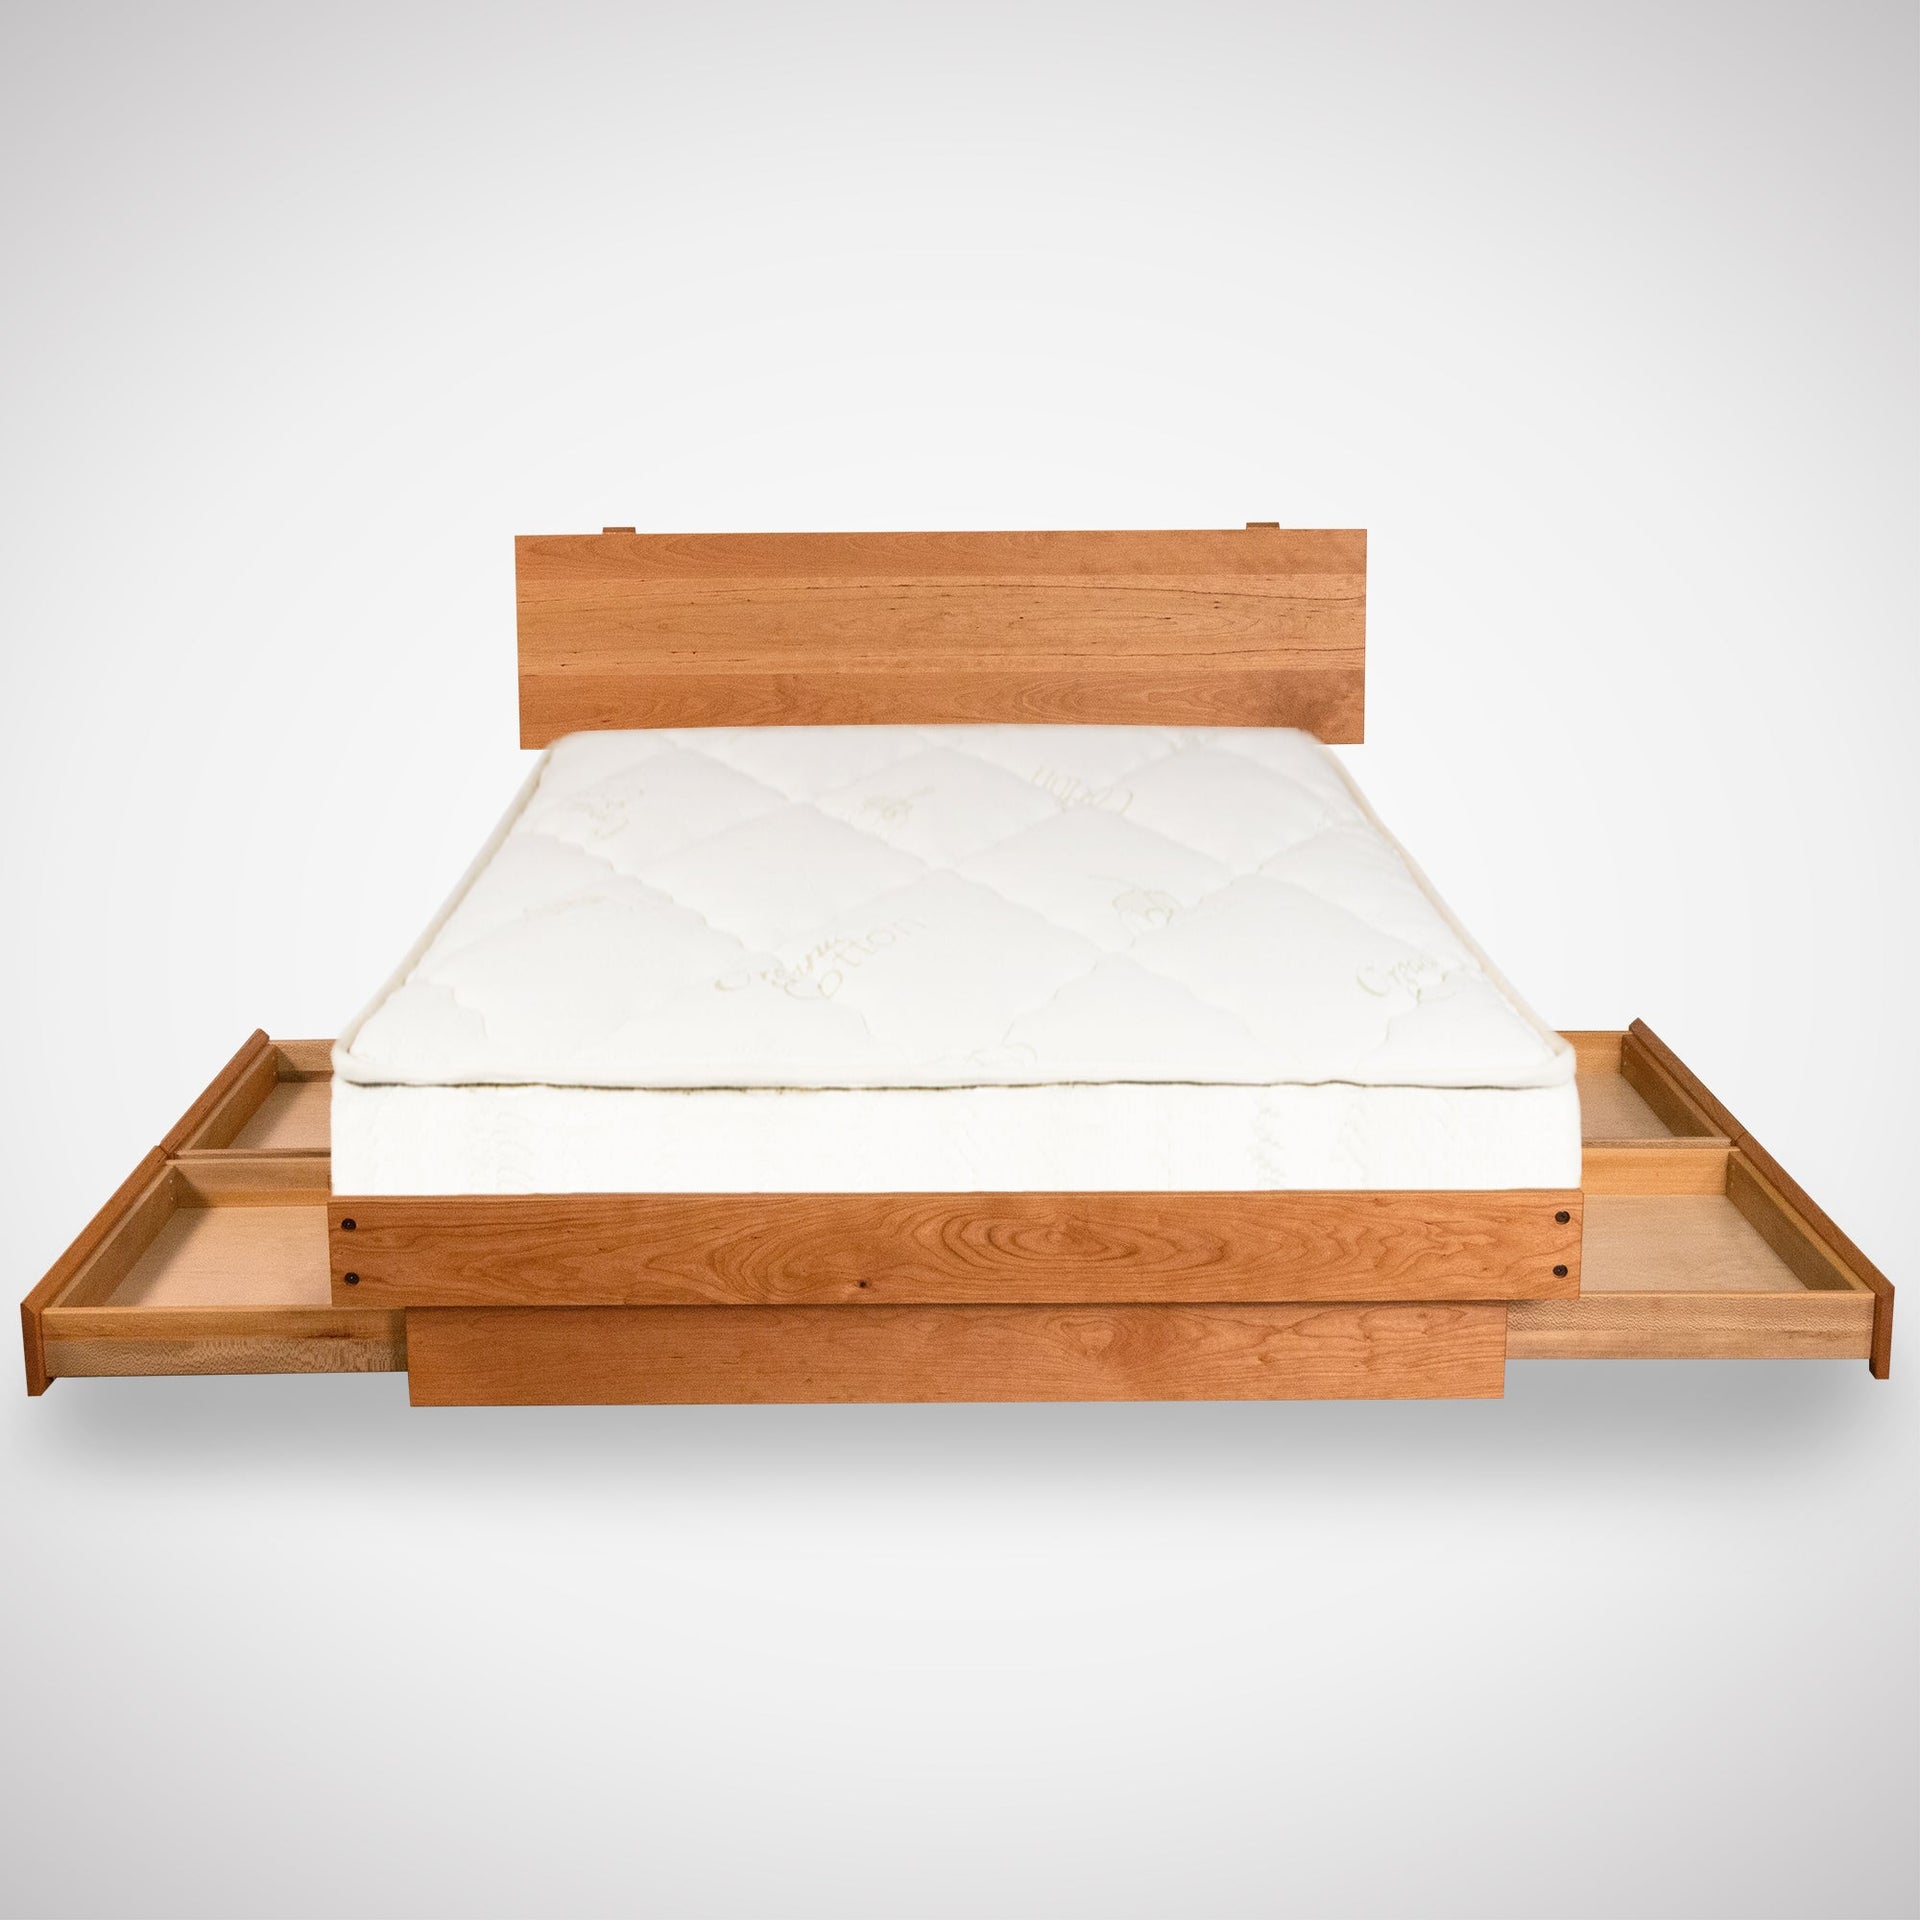 Sleek and minimalist wooden bed frame with storage